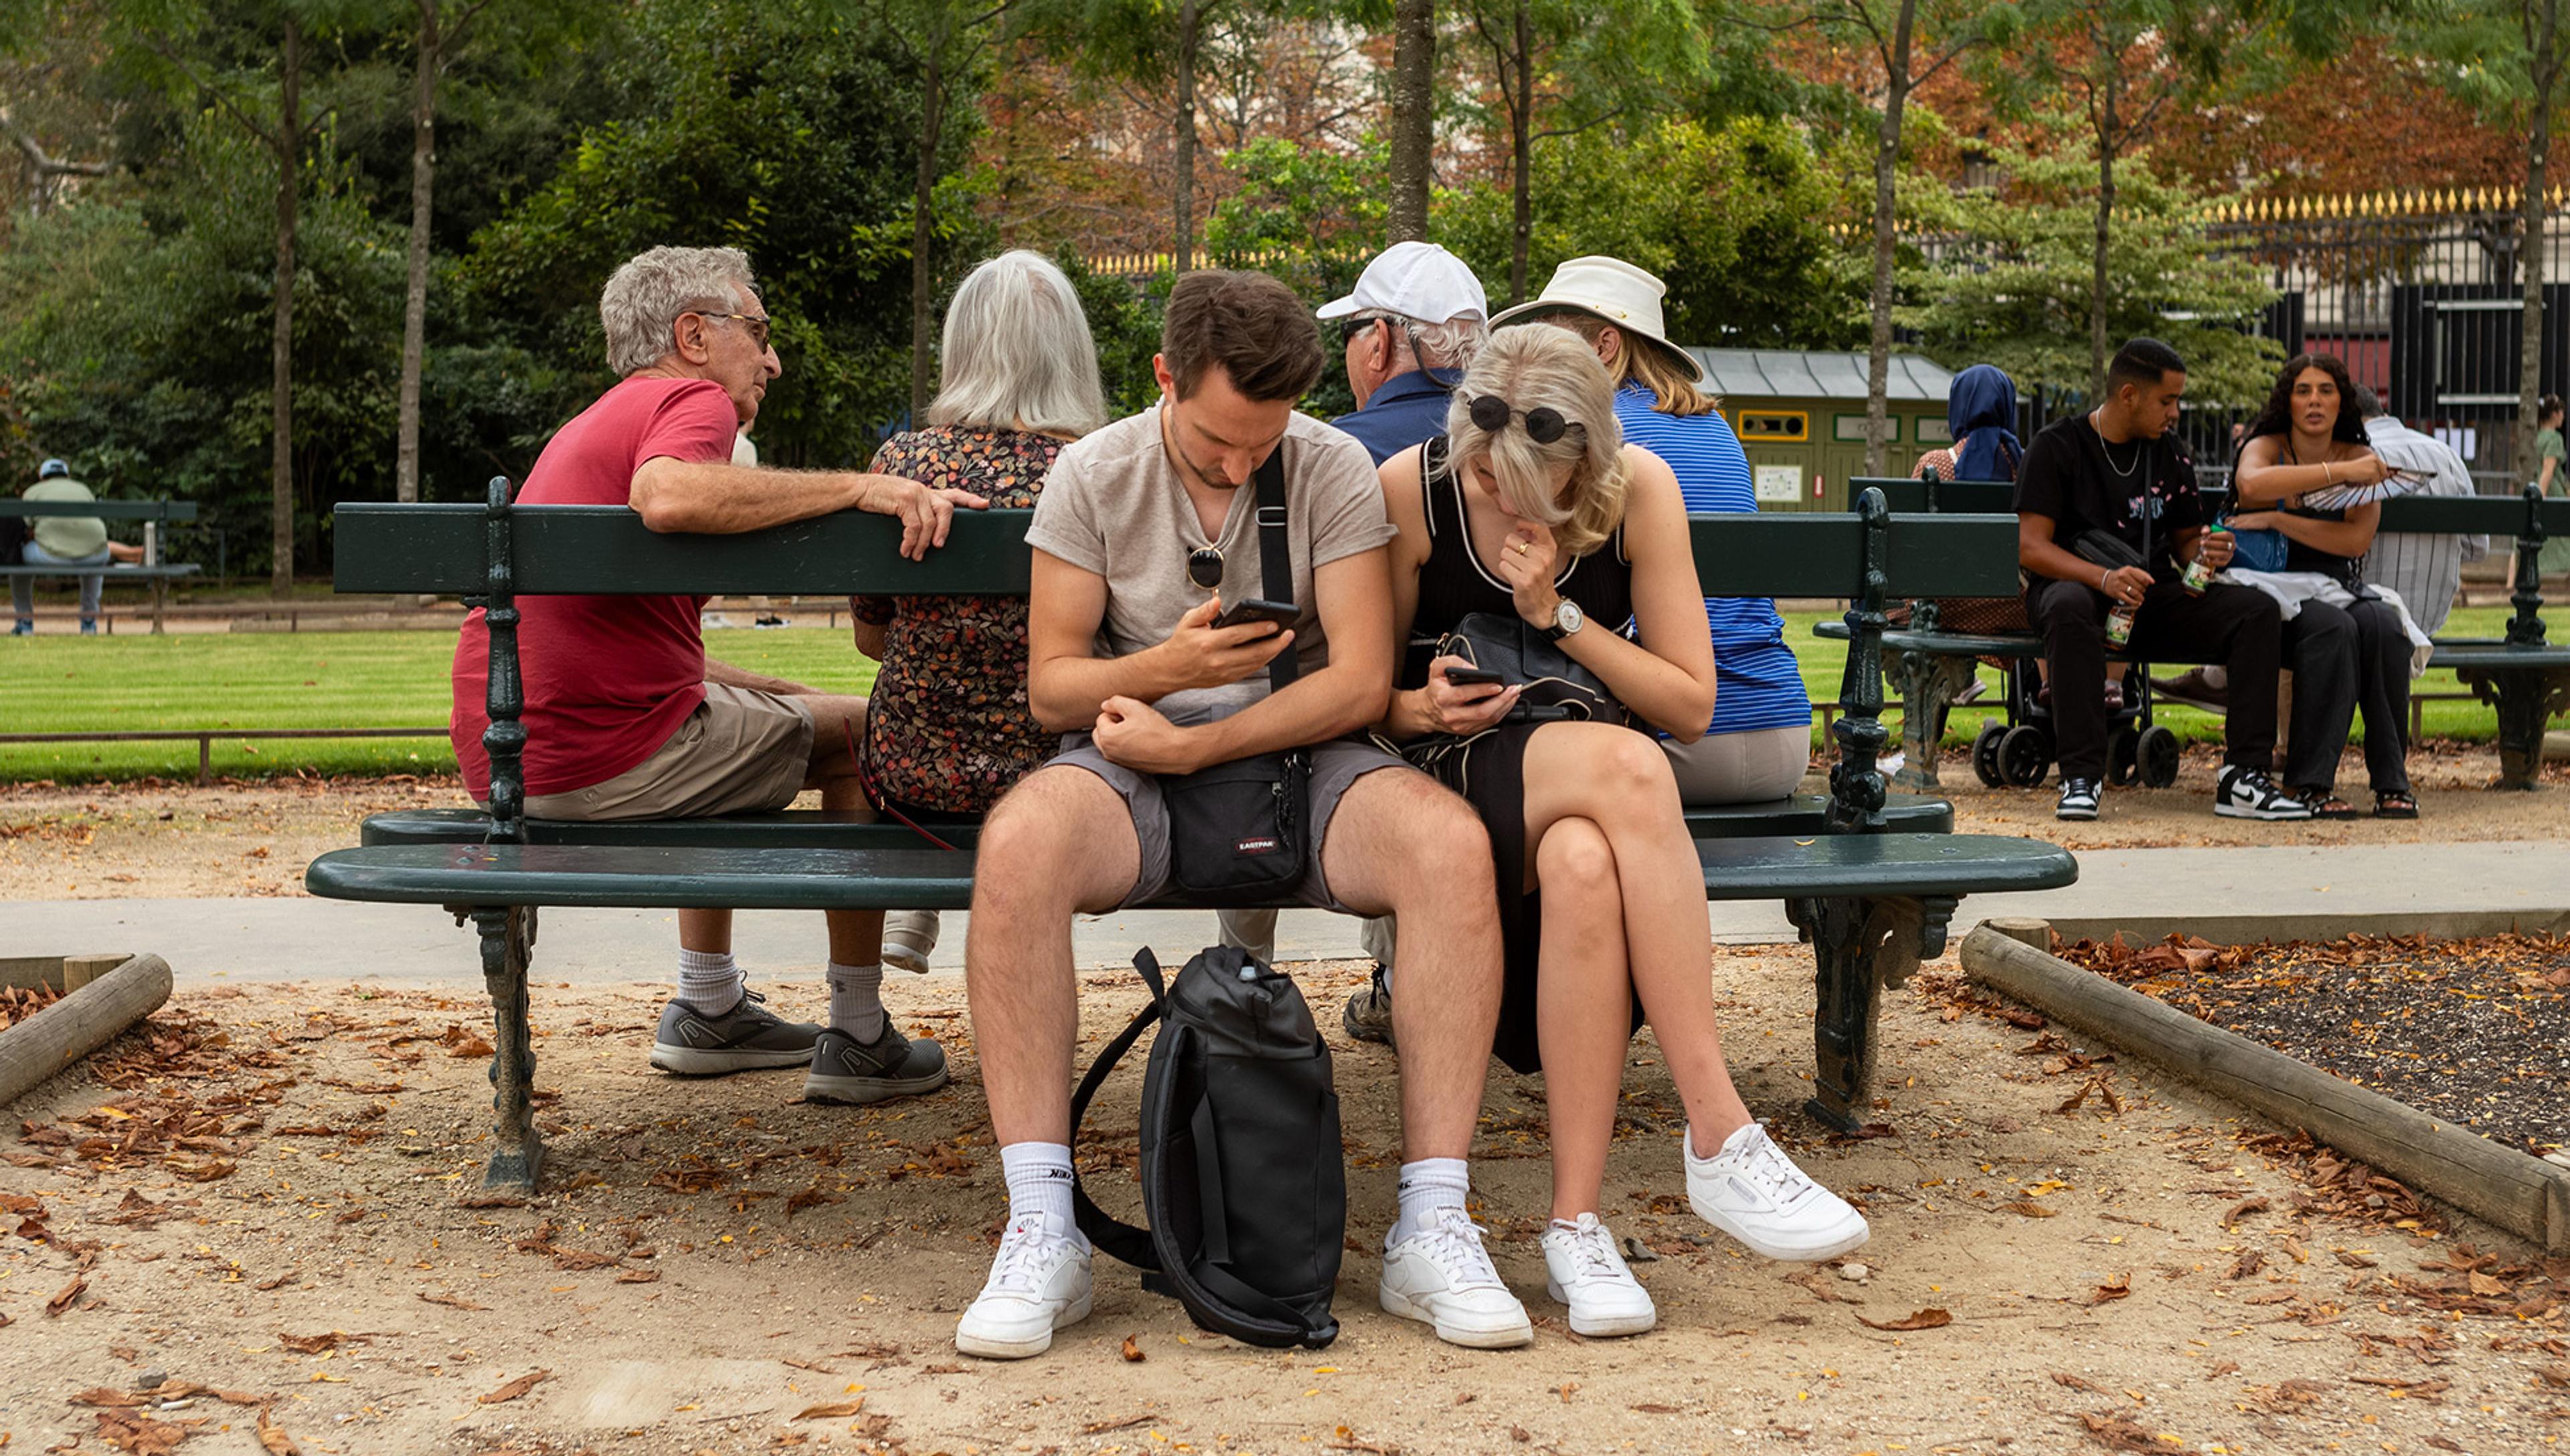 People of different ages and genders sitting on park benches, some chatting, some looking at their smartphones